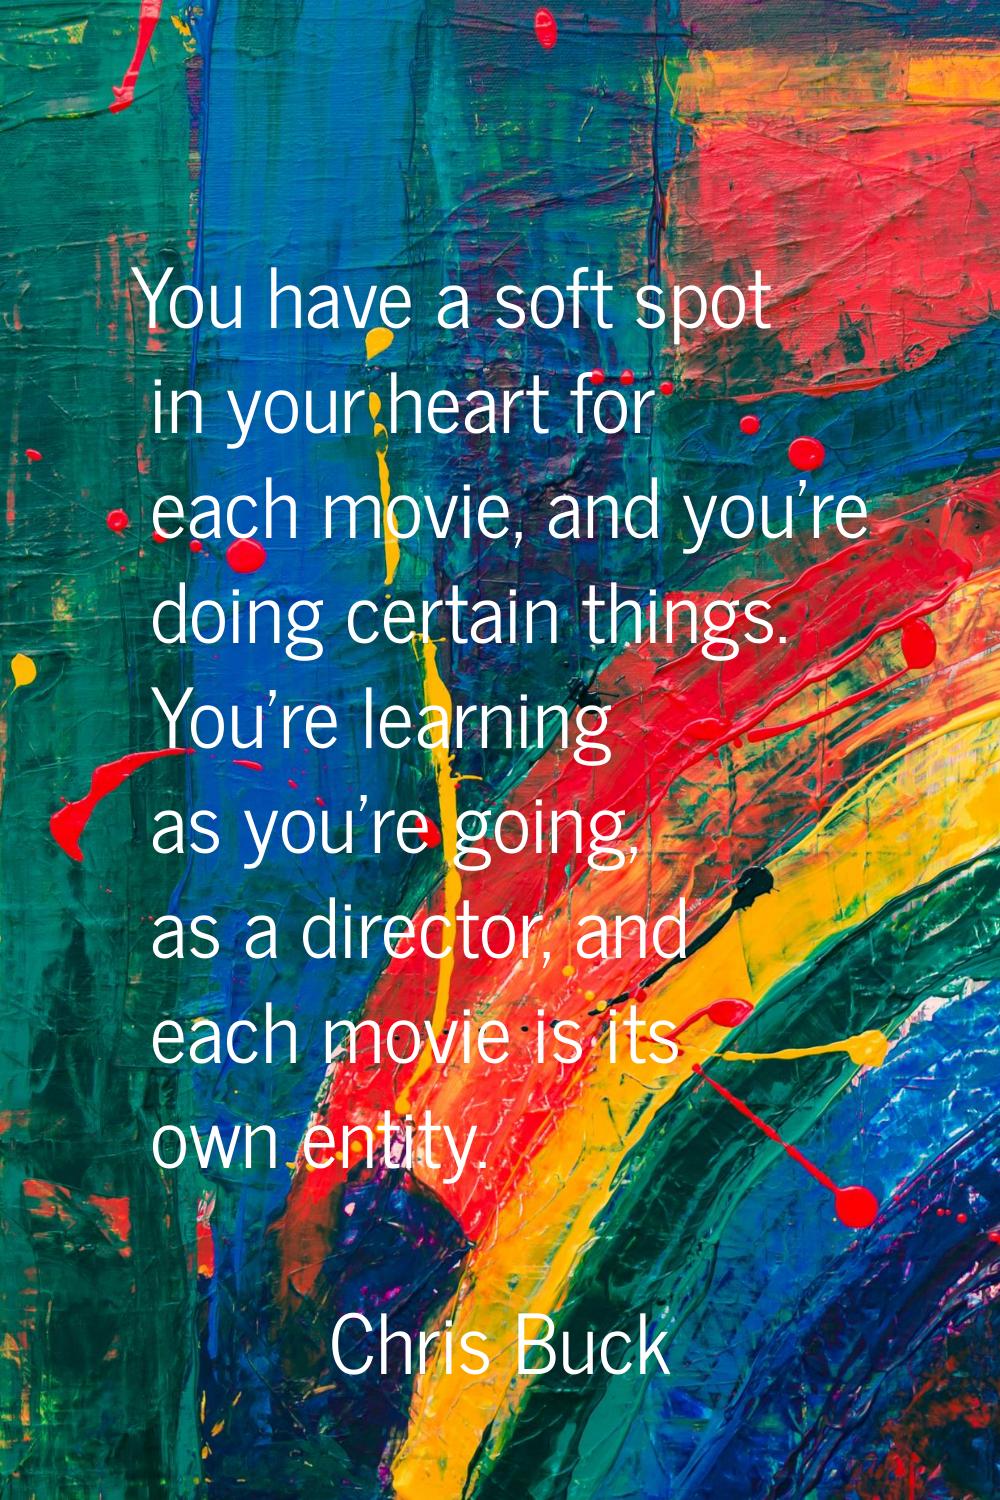 You have a soft spot in your heart for each movie, and you're doing certain things. You're learning